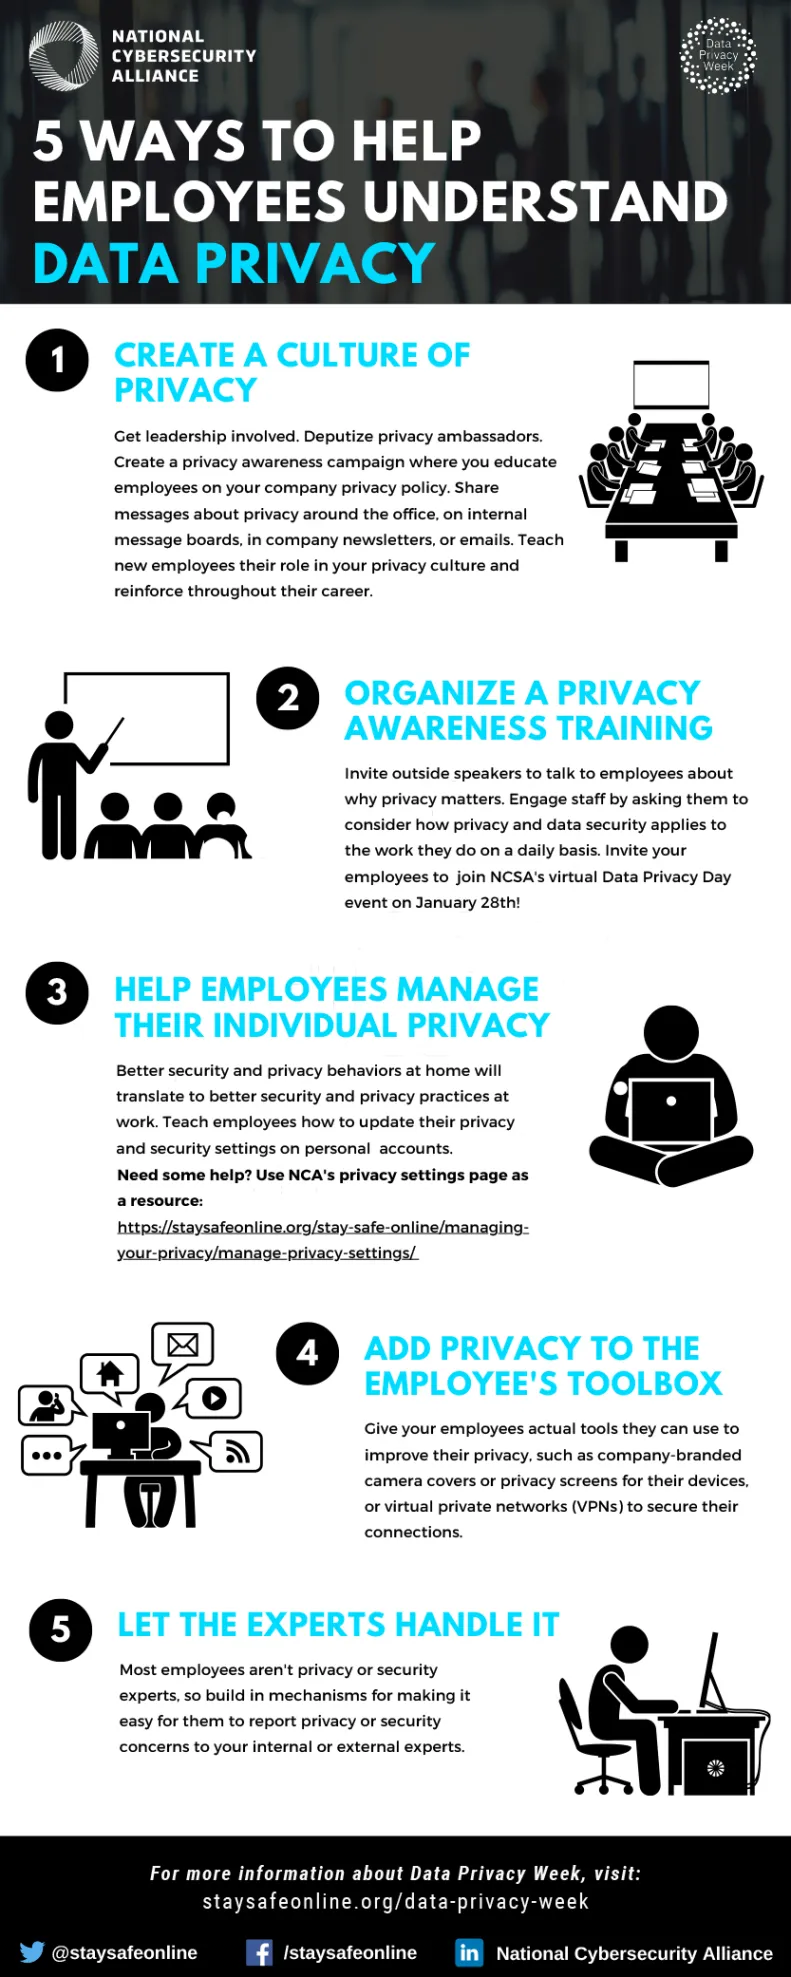 Here are 5 steps to help employees understand data privacy.